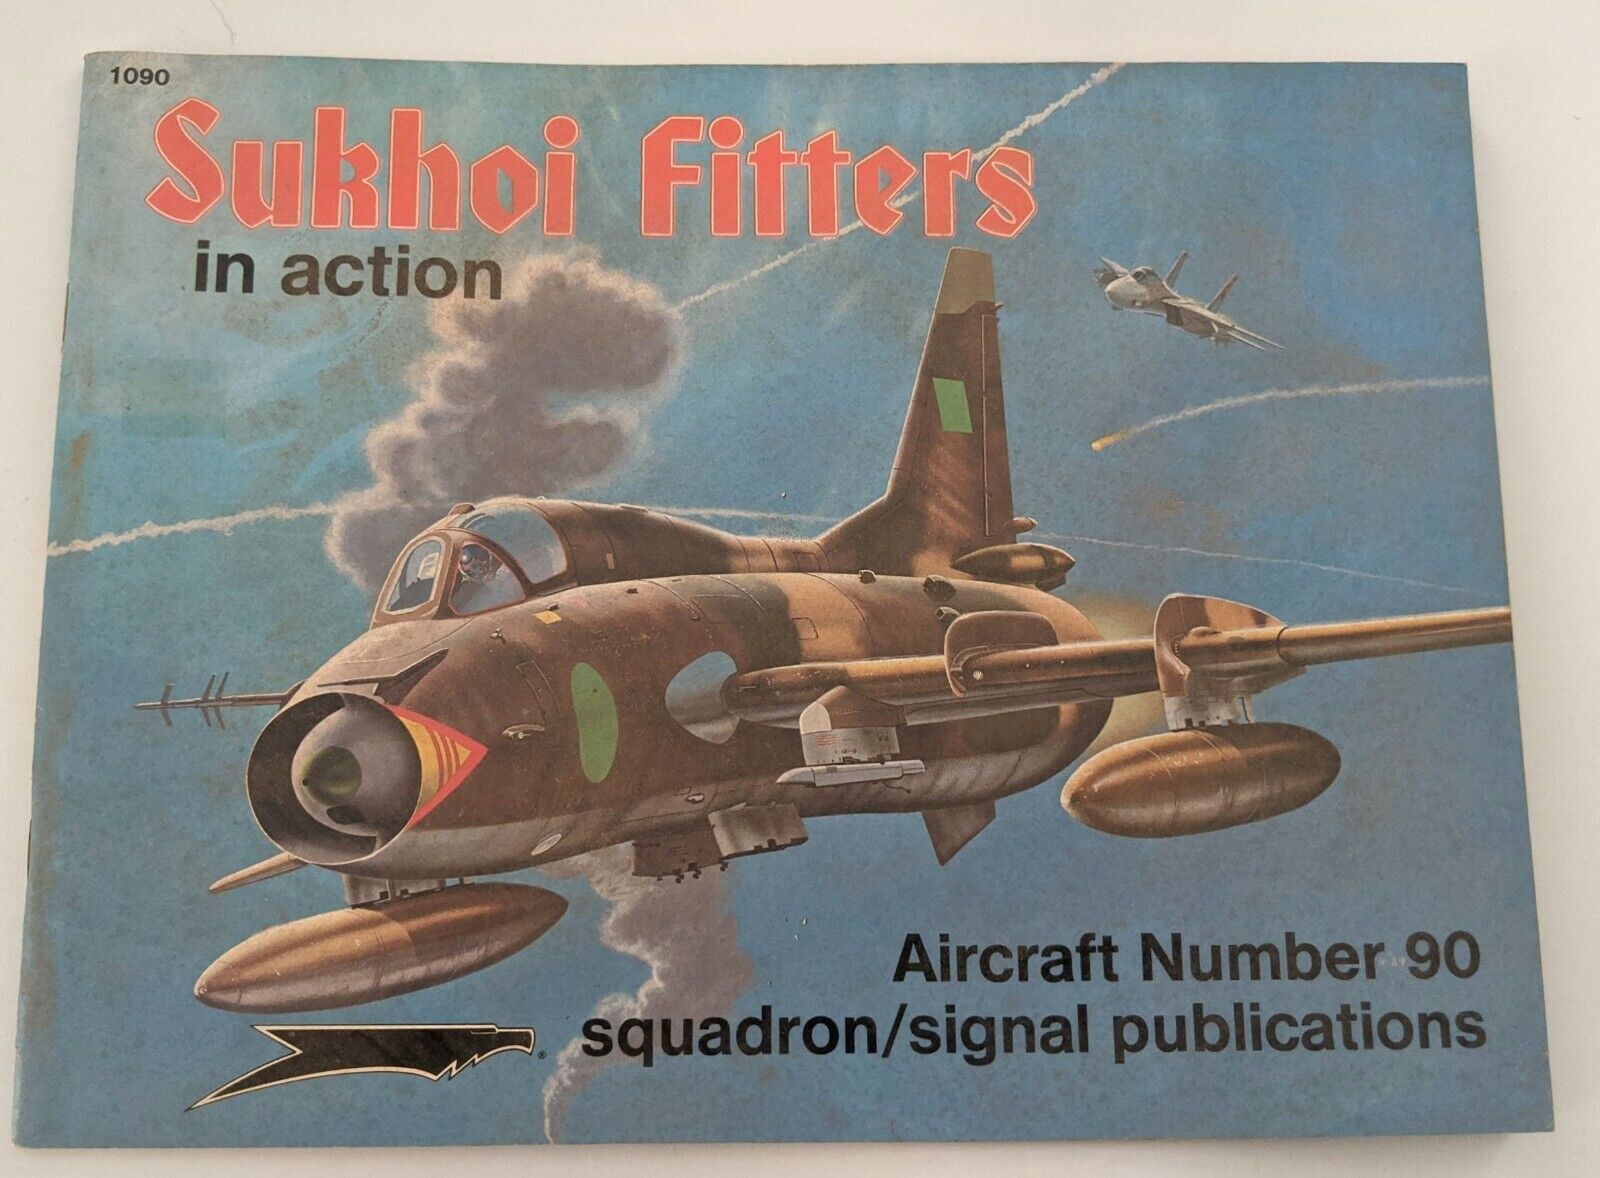 Sukhoi Fitters in action - squadron/signal publications - Aircraft Number 90